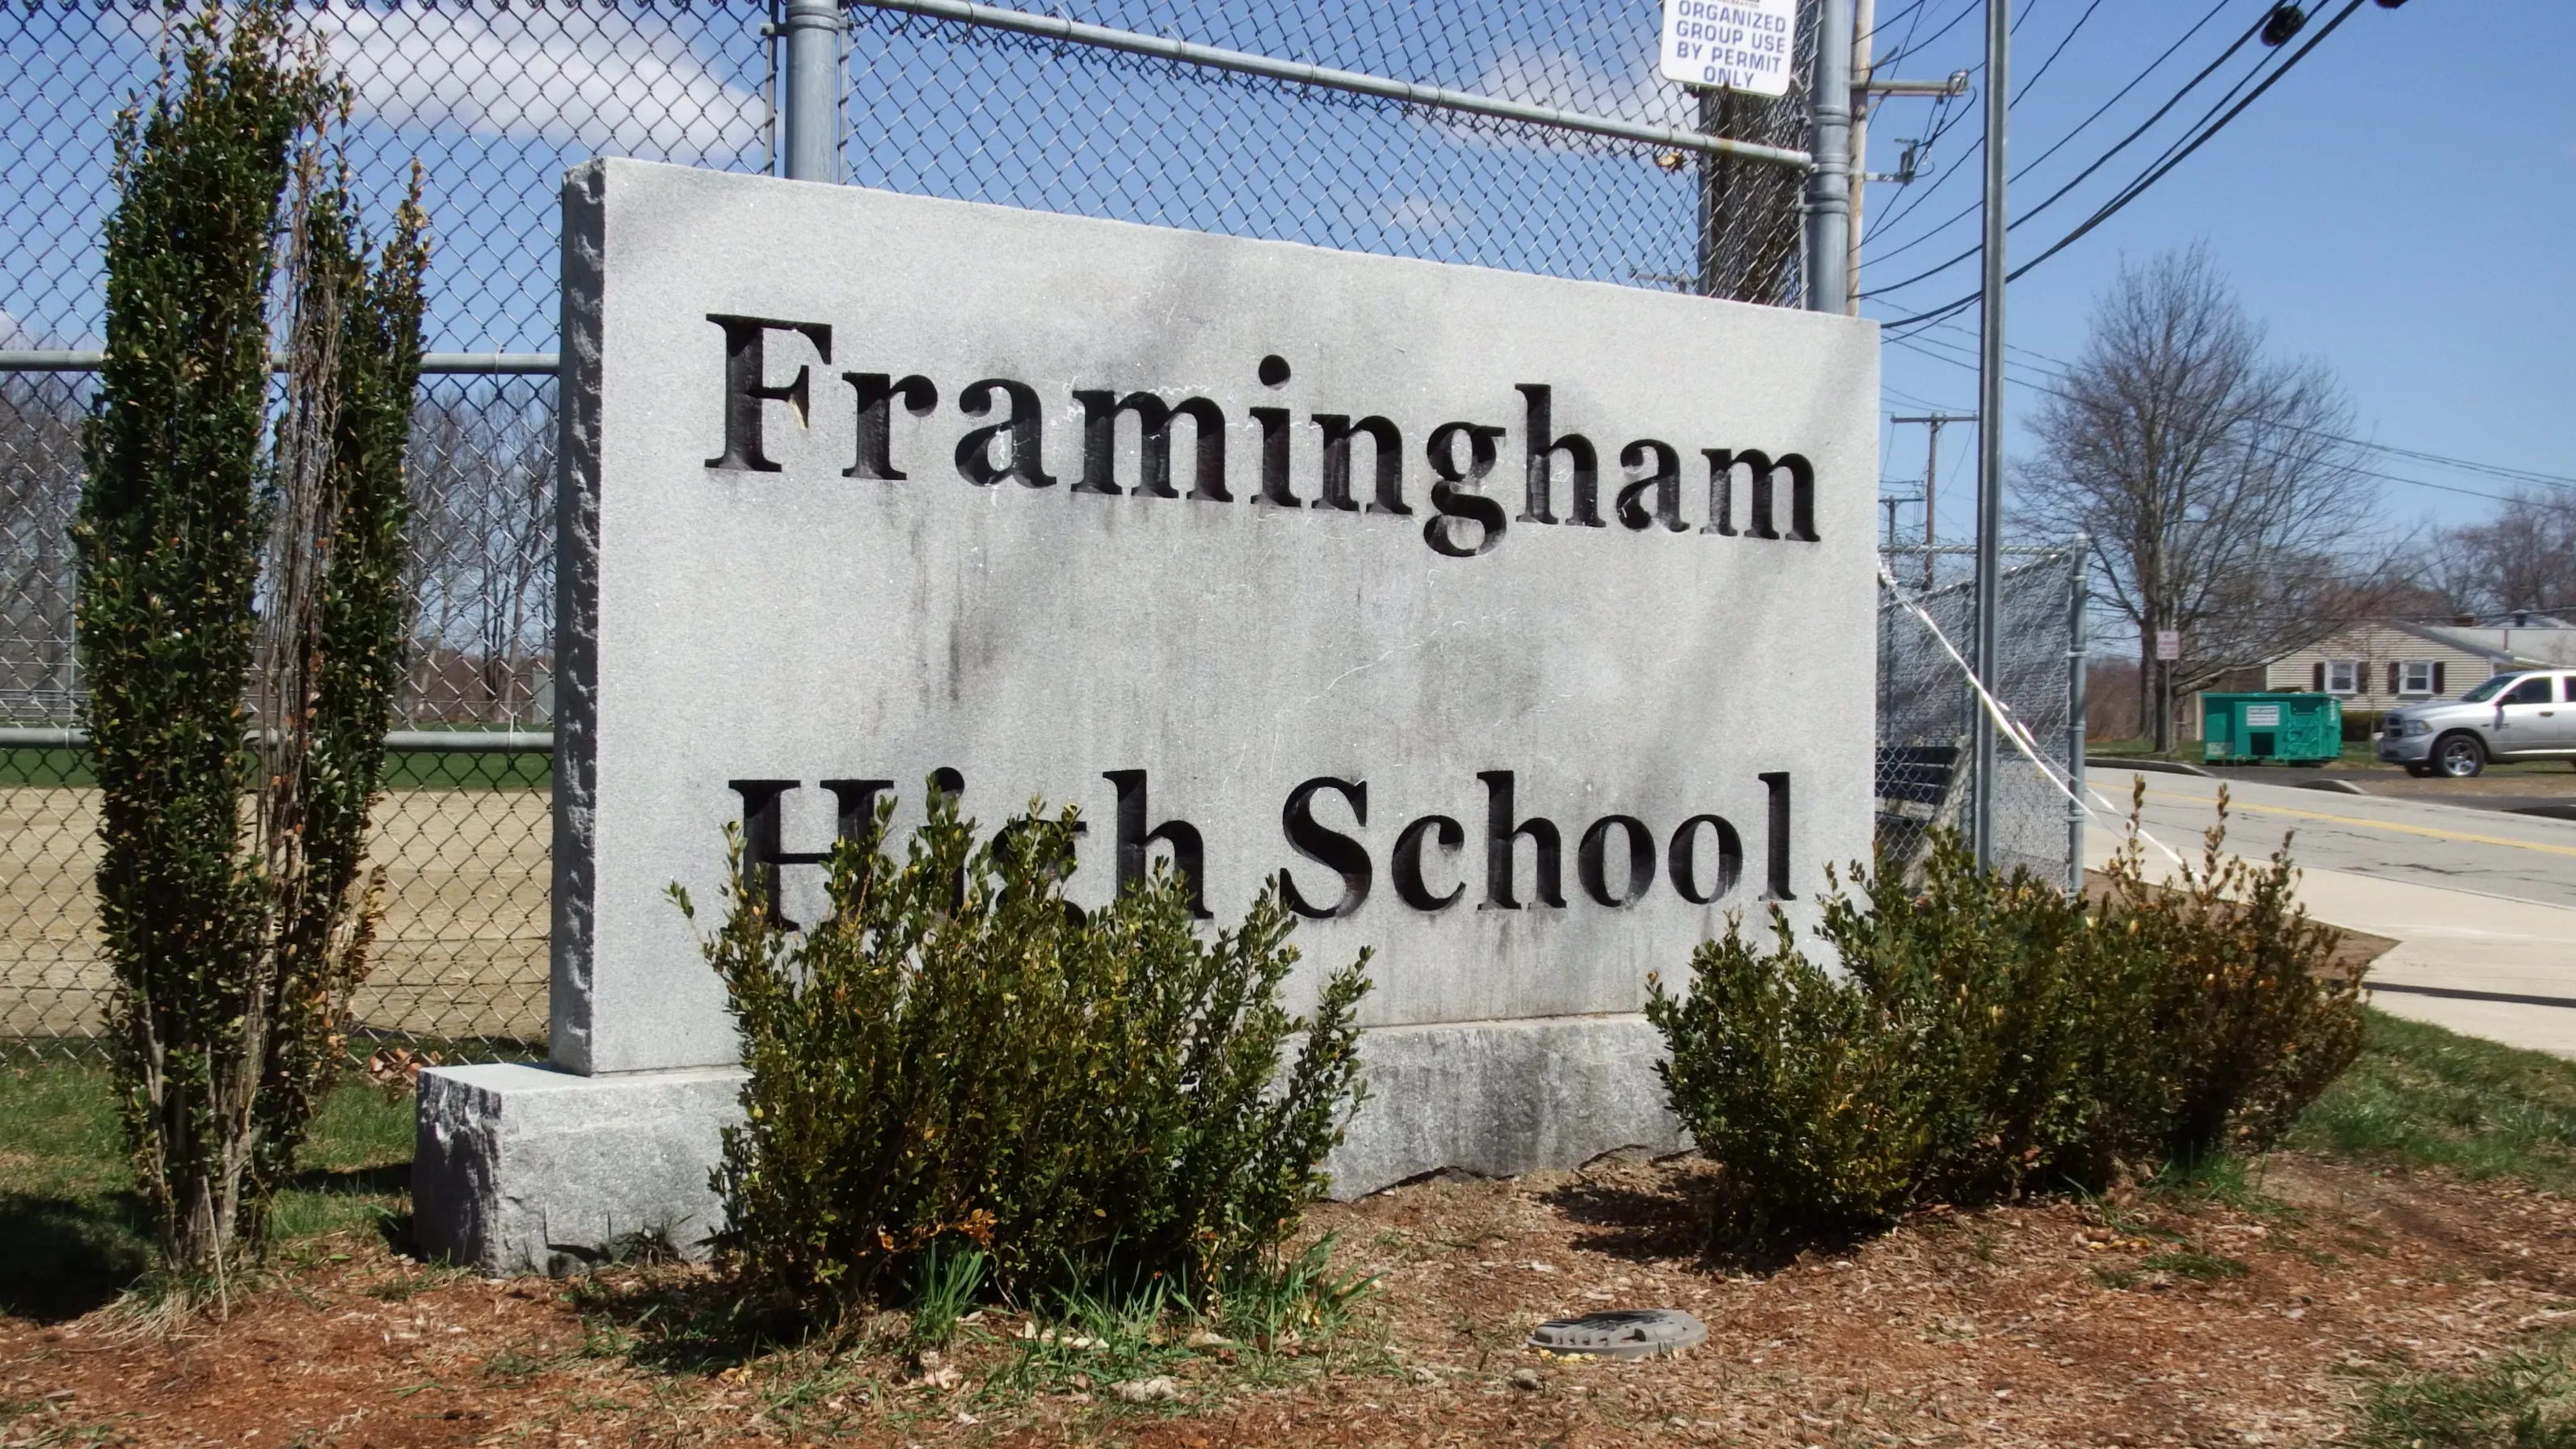  Seven people will be inducted into Framingham Hall of Fame on April 28 